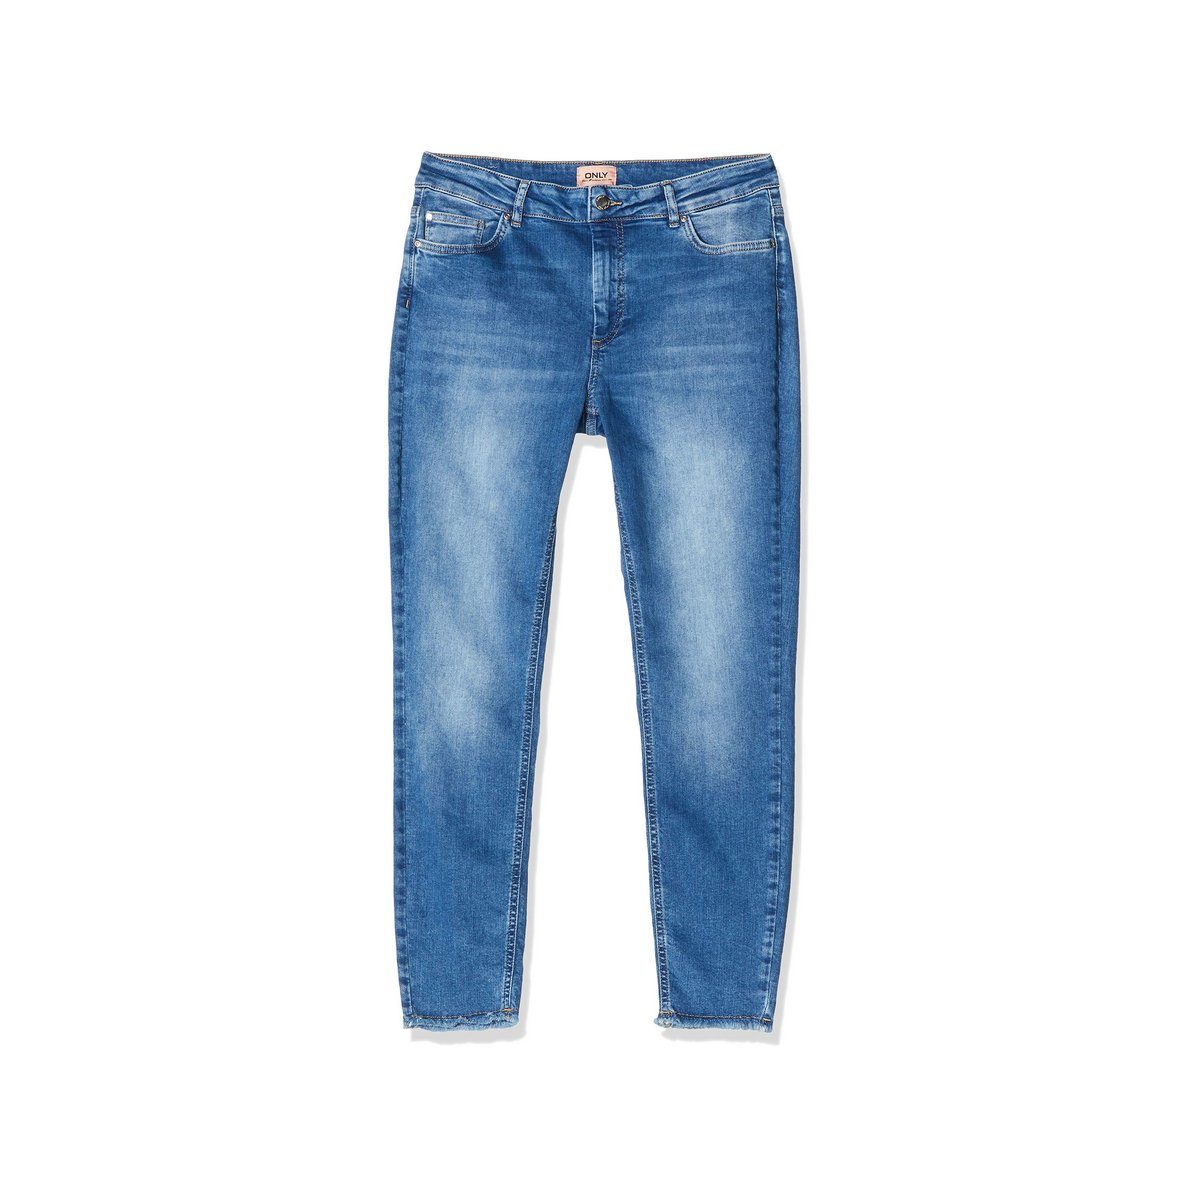 ONLY & SONS 5-Pocket-Jeans mittel-blau (1-tlg) | Straight-Fit Jeans